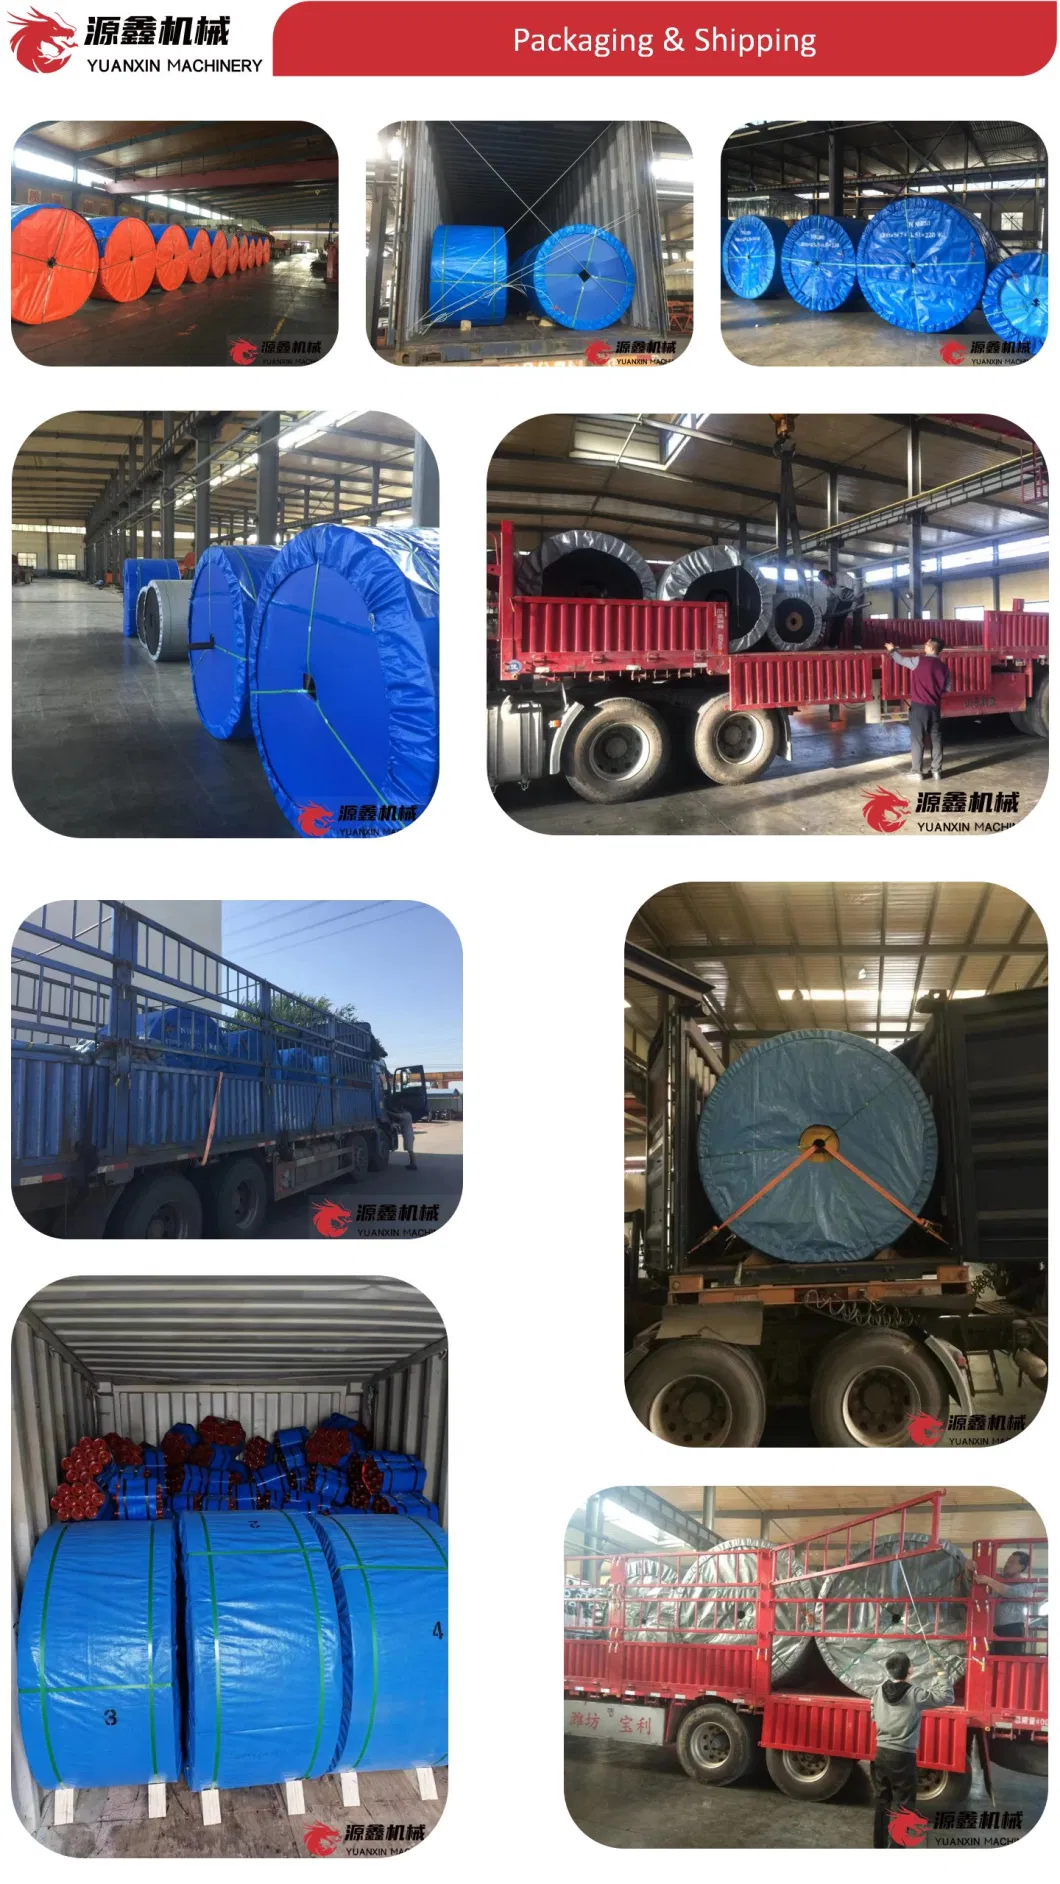 Wear-Resistant Rubber for Conveying Equipment